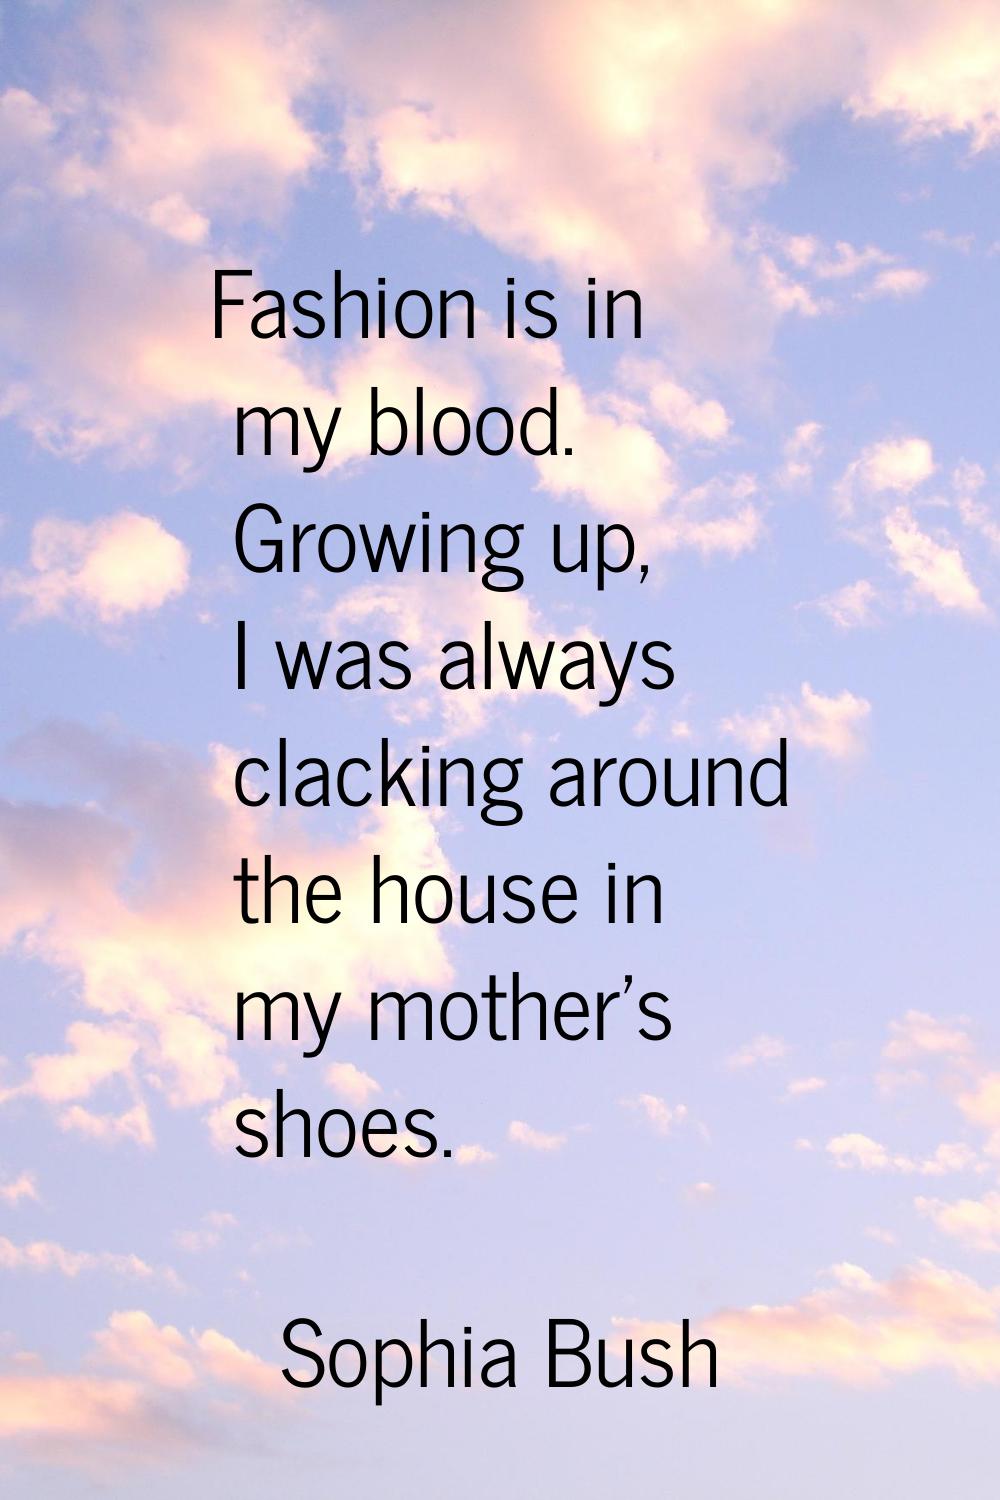 Fashion is in my blood. Growing up, I was always clacking around the house in my mother's shoes.